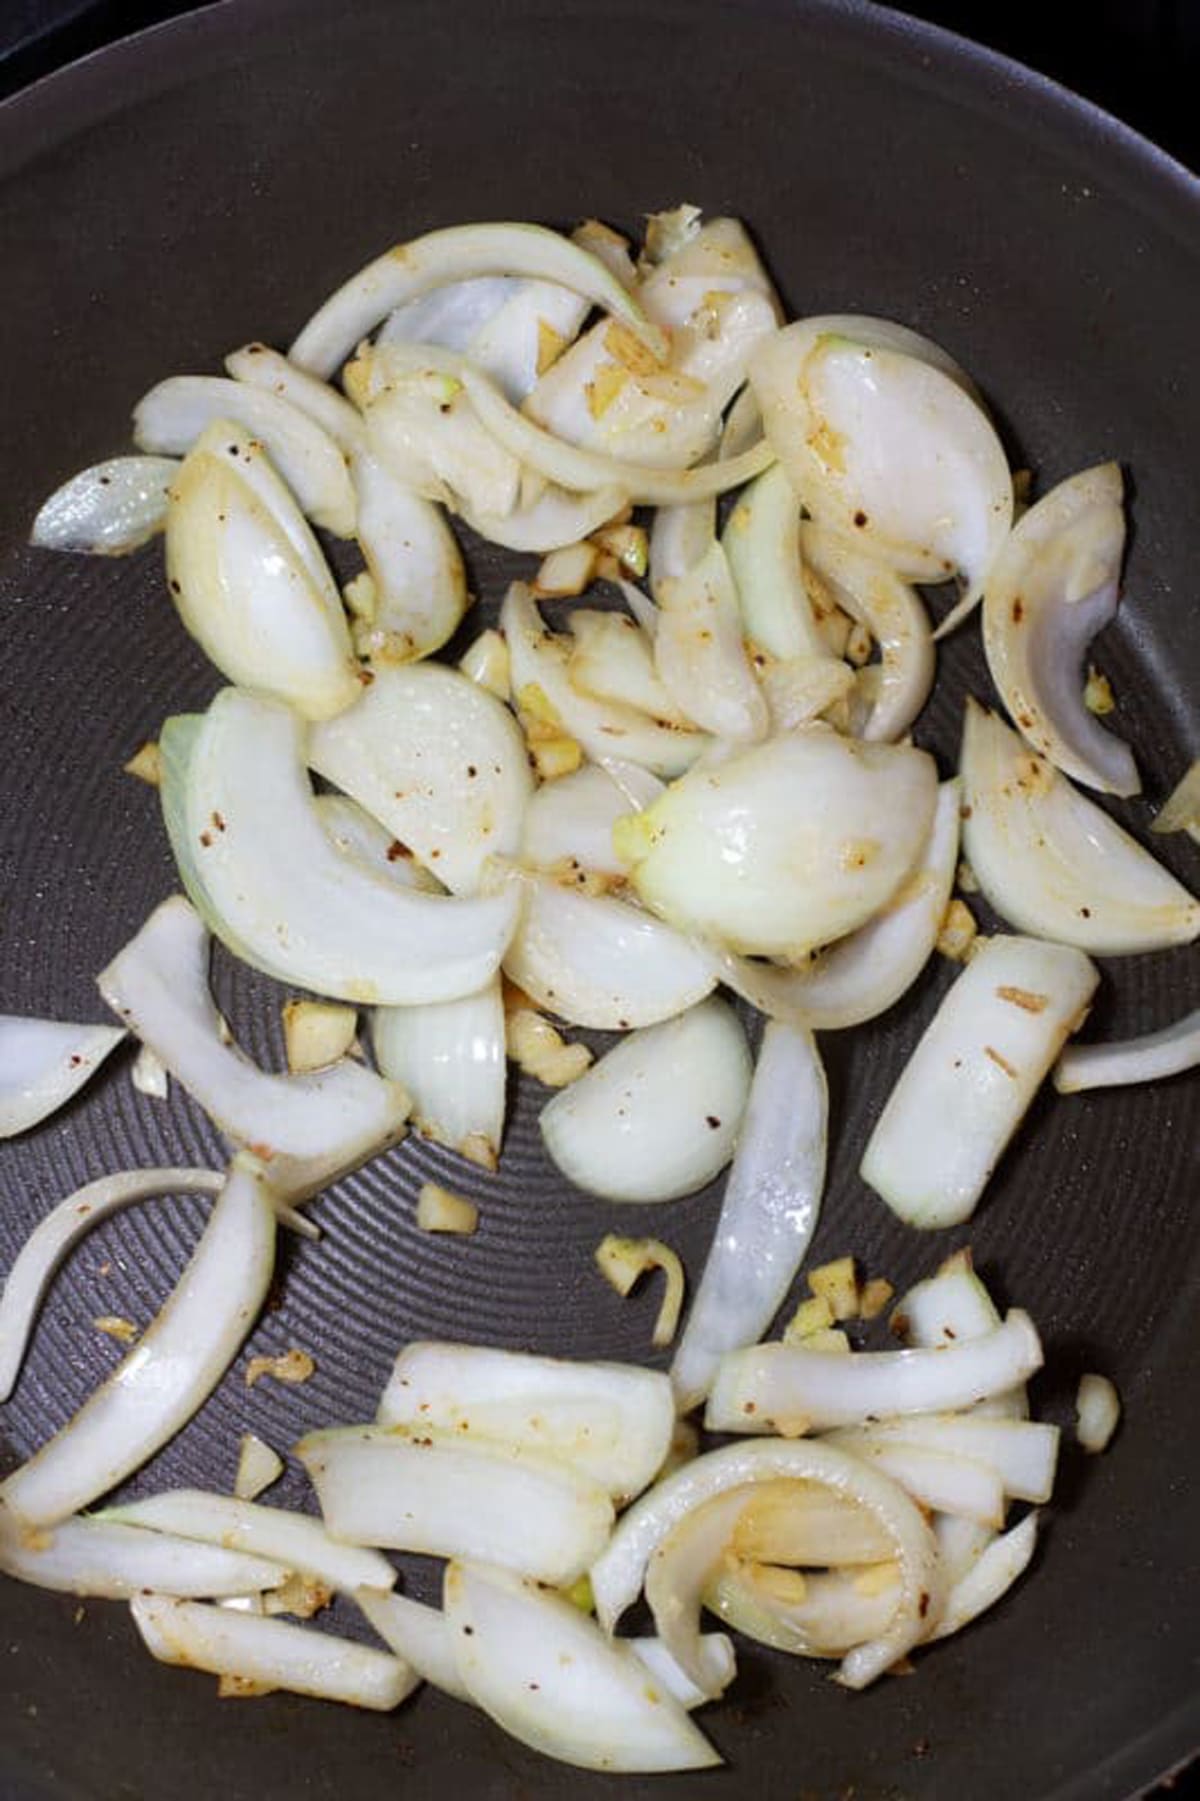 Sauteed onions and garlic in skillet on stovetop.